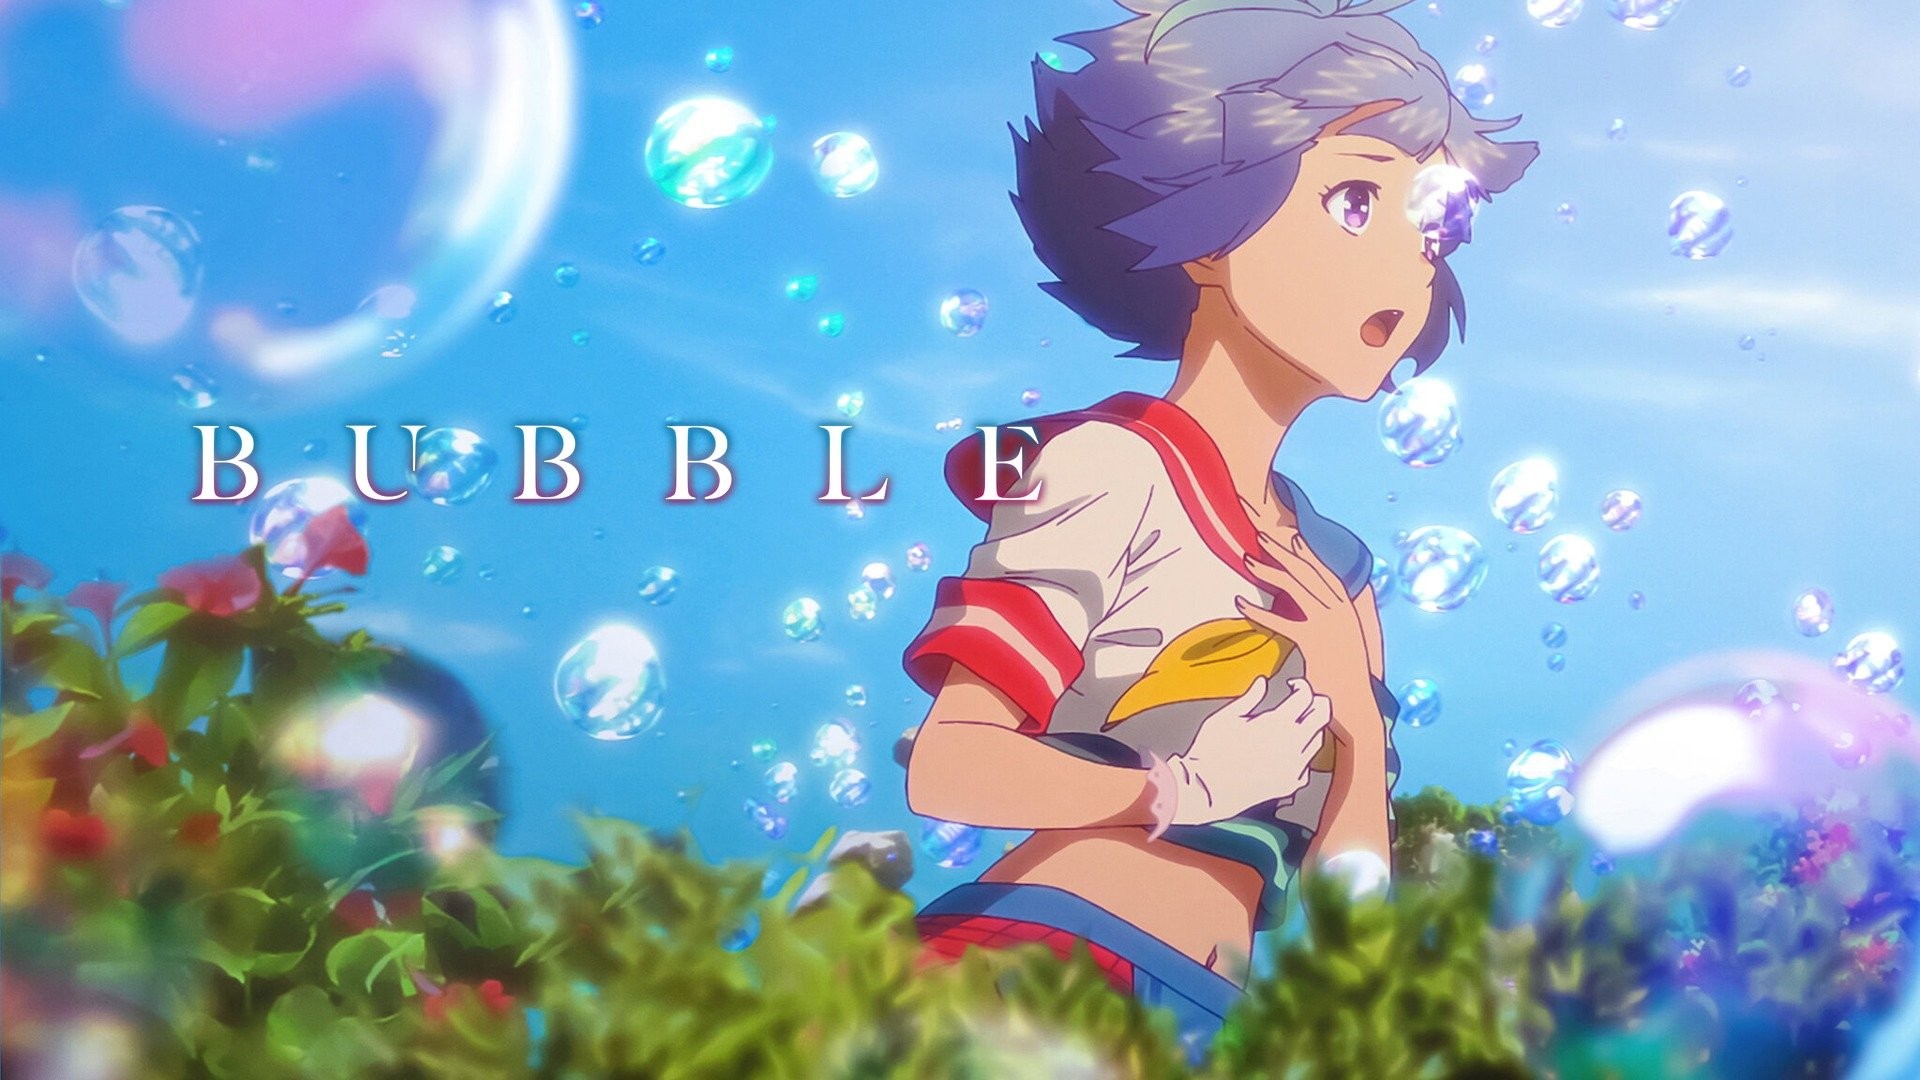 Bubble review - is the Netflix anime movie worth your time?